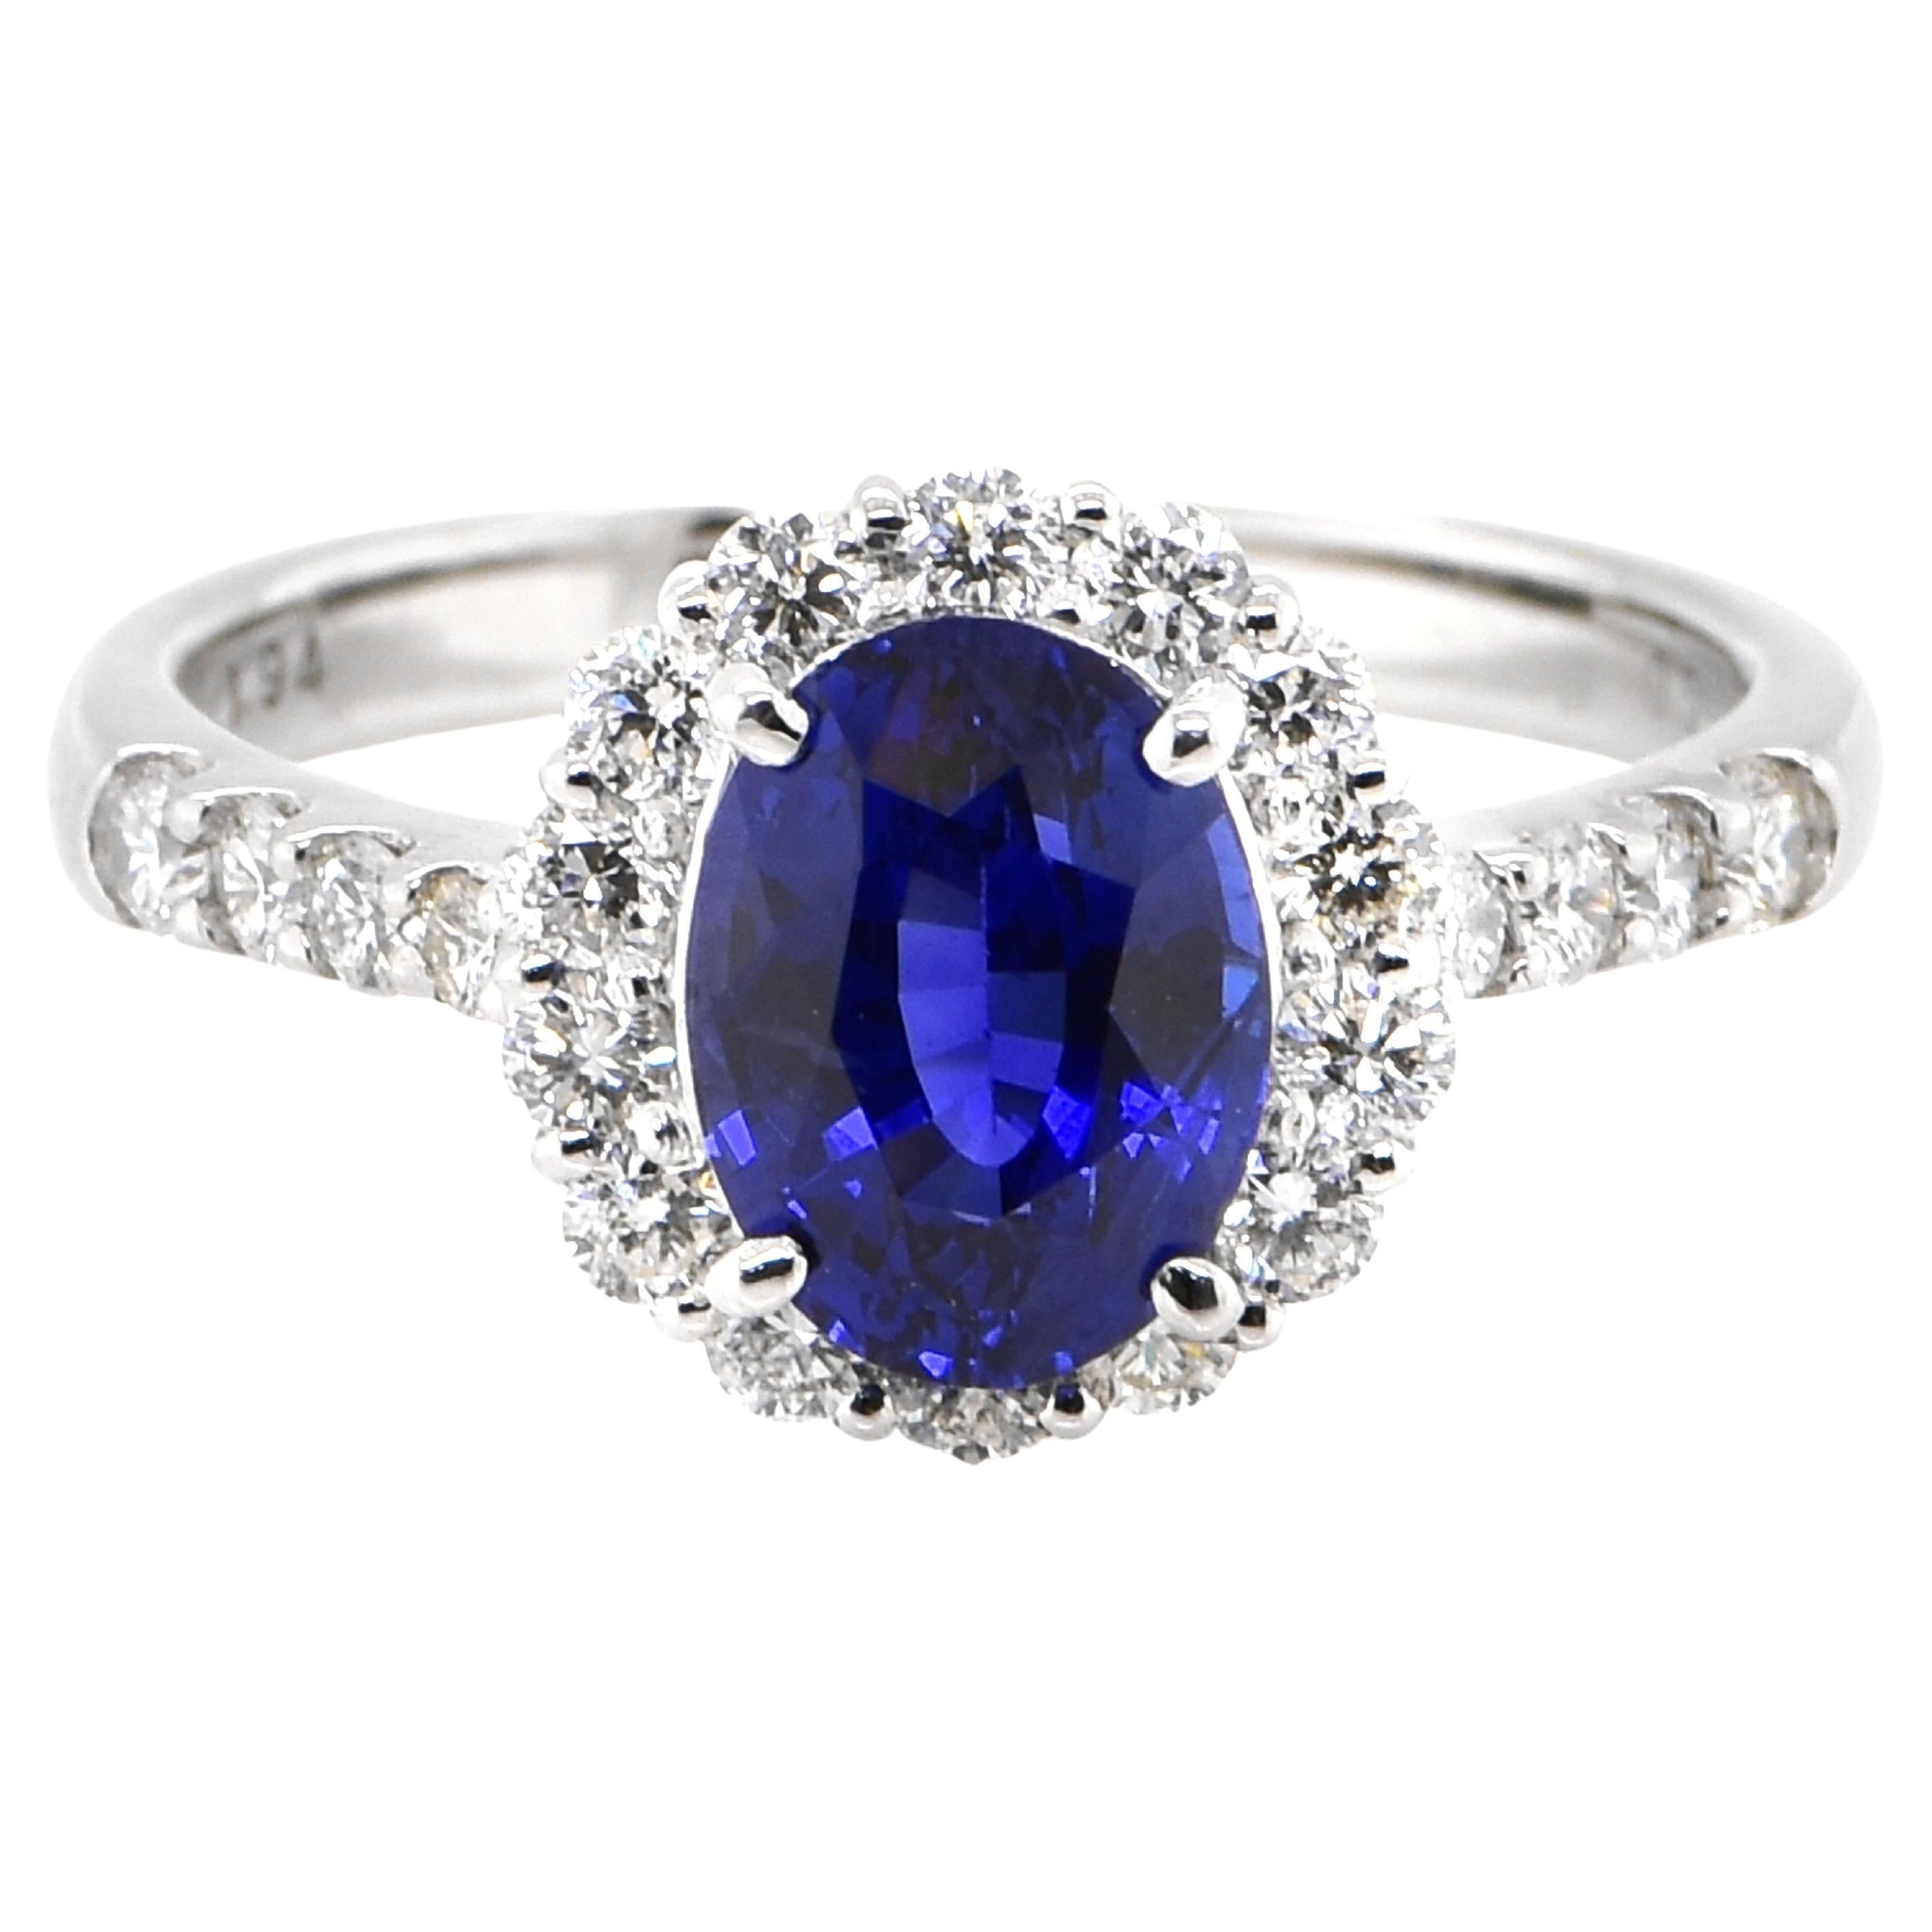 1.92 Carat Natural Royal Blue Sapphire and Diamond Halo Ring Made in Platinum For Sale